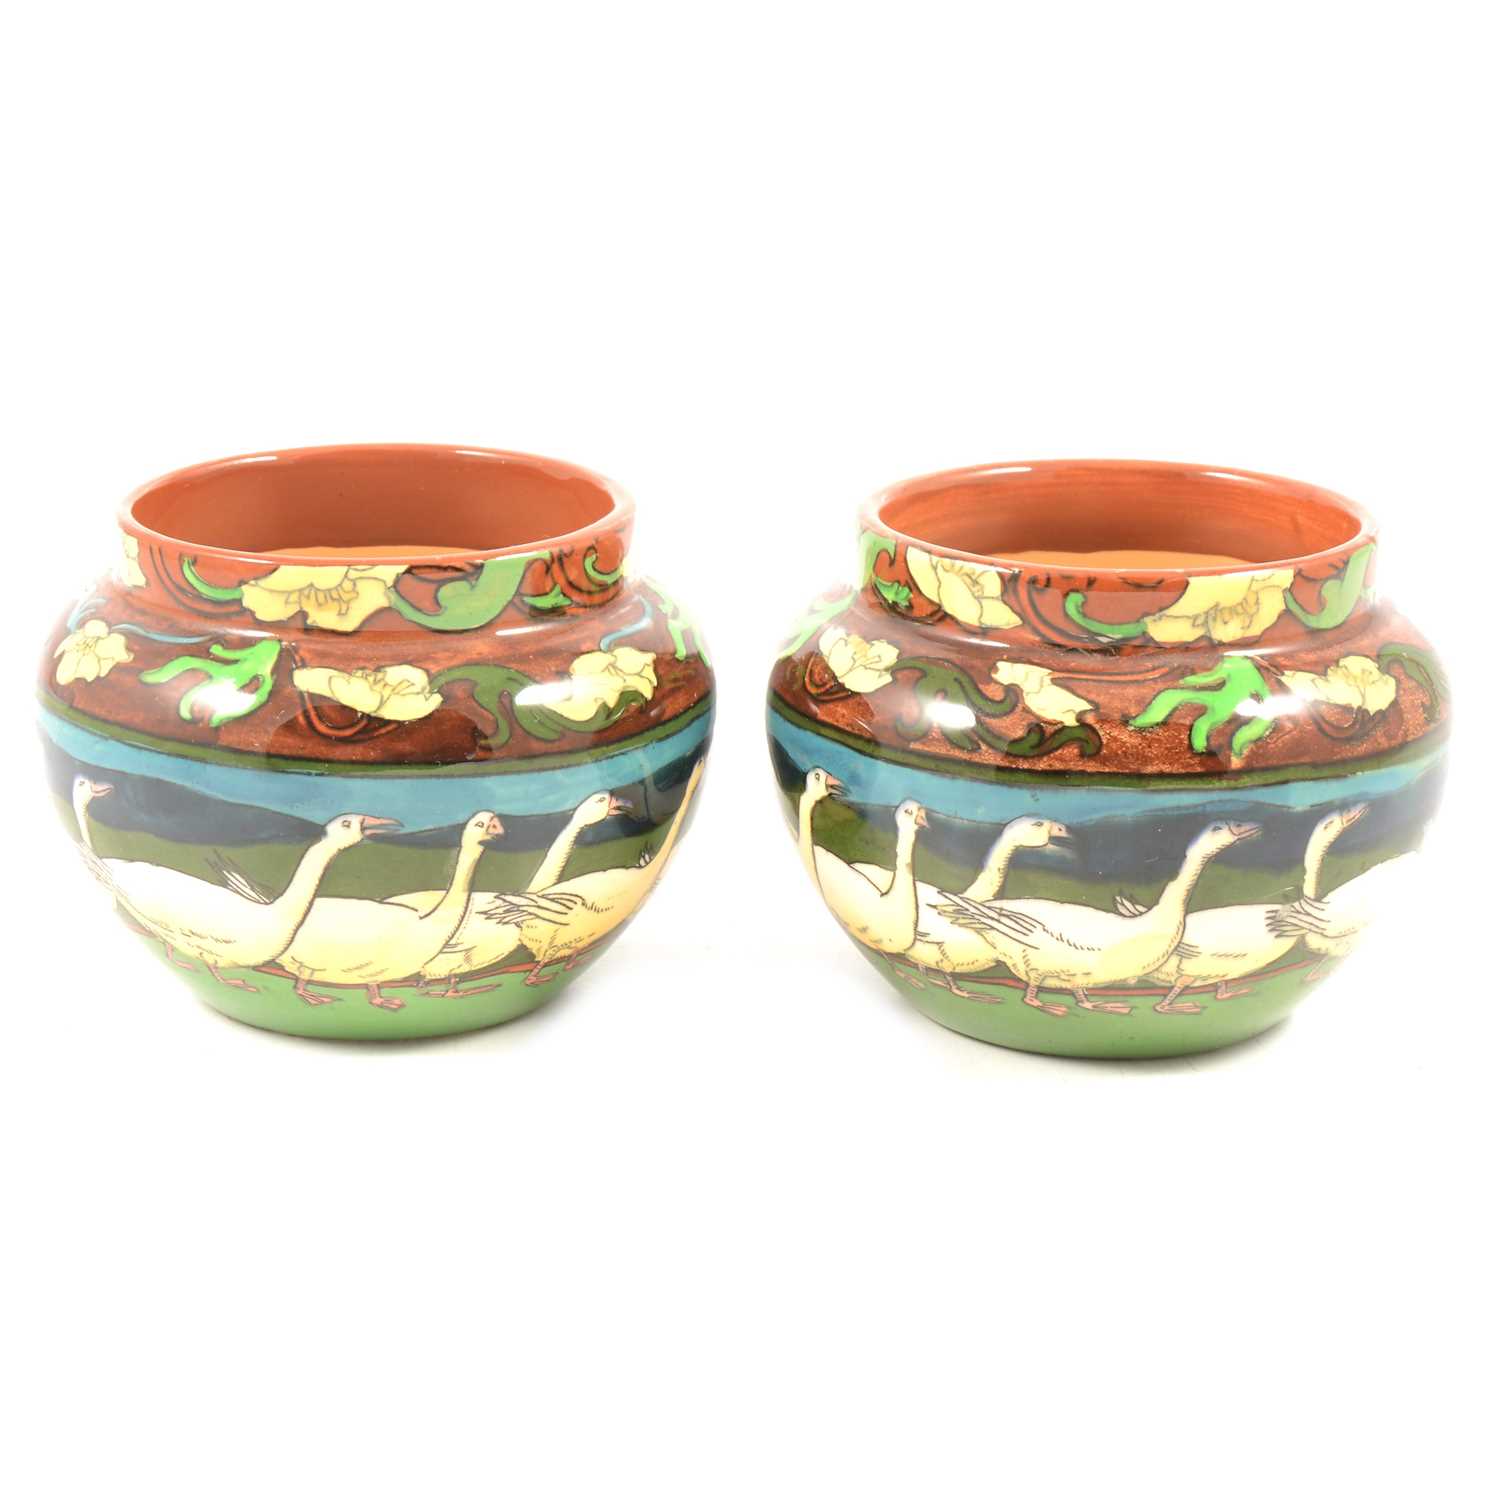 Lot 100 - Frederick Rhead for Foley, a pair of Intarsio Ware small jardinieres